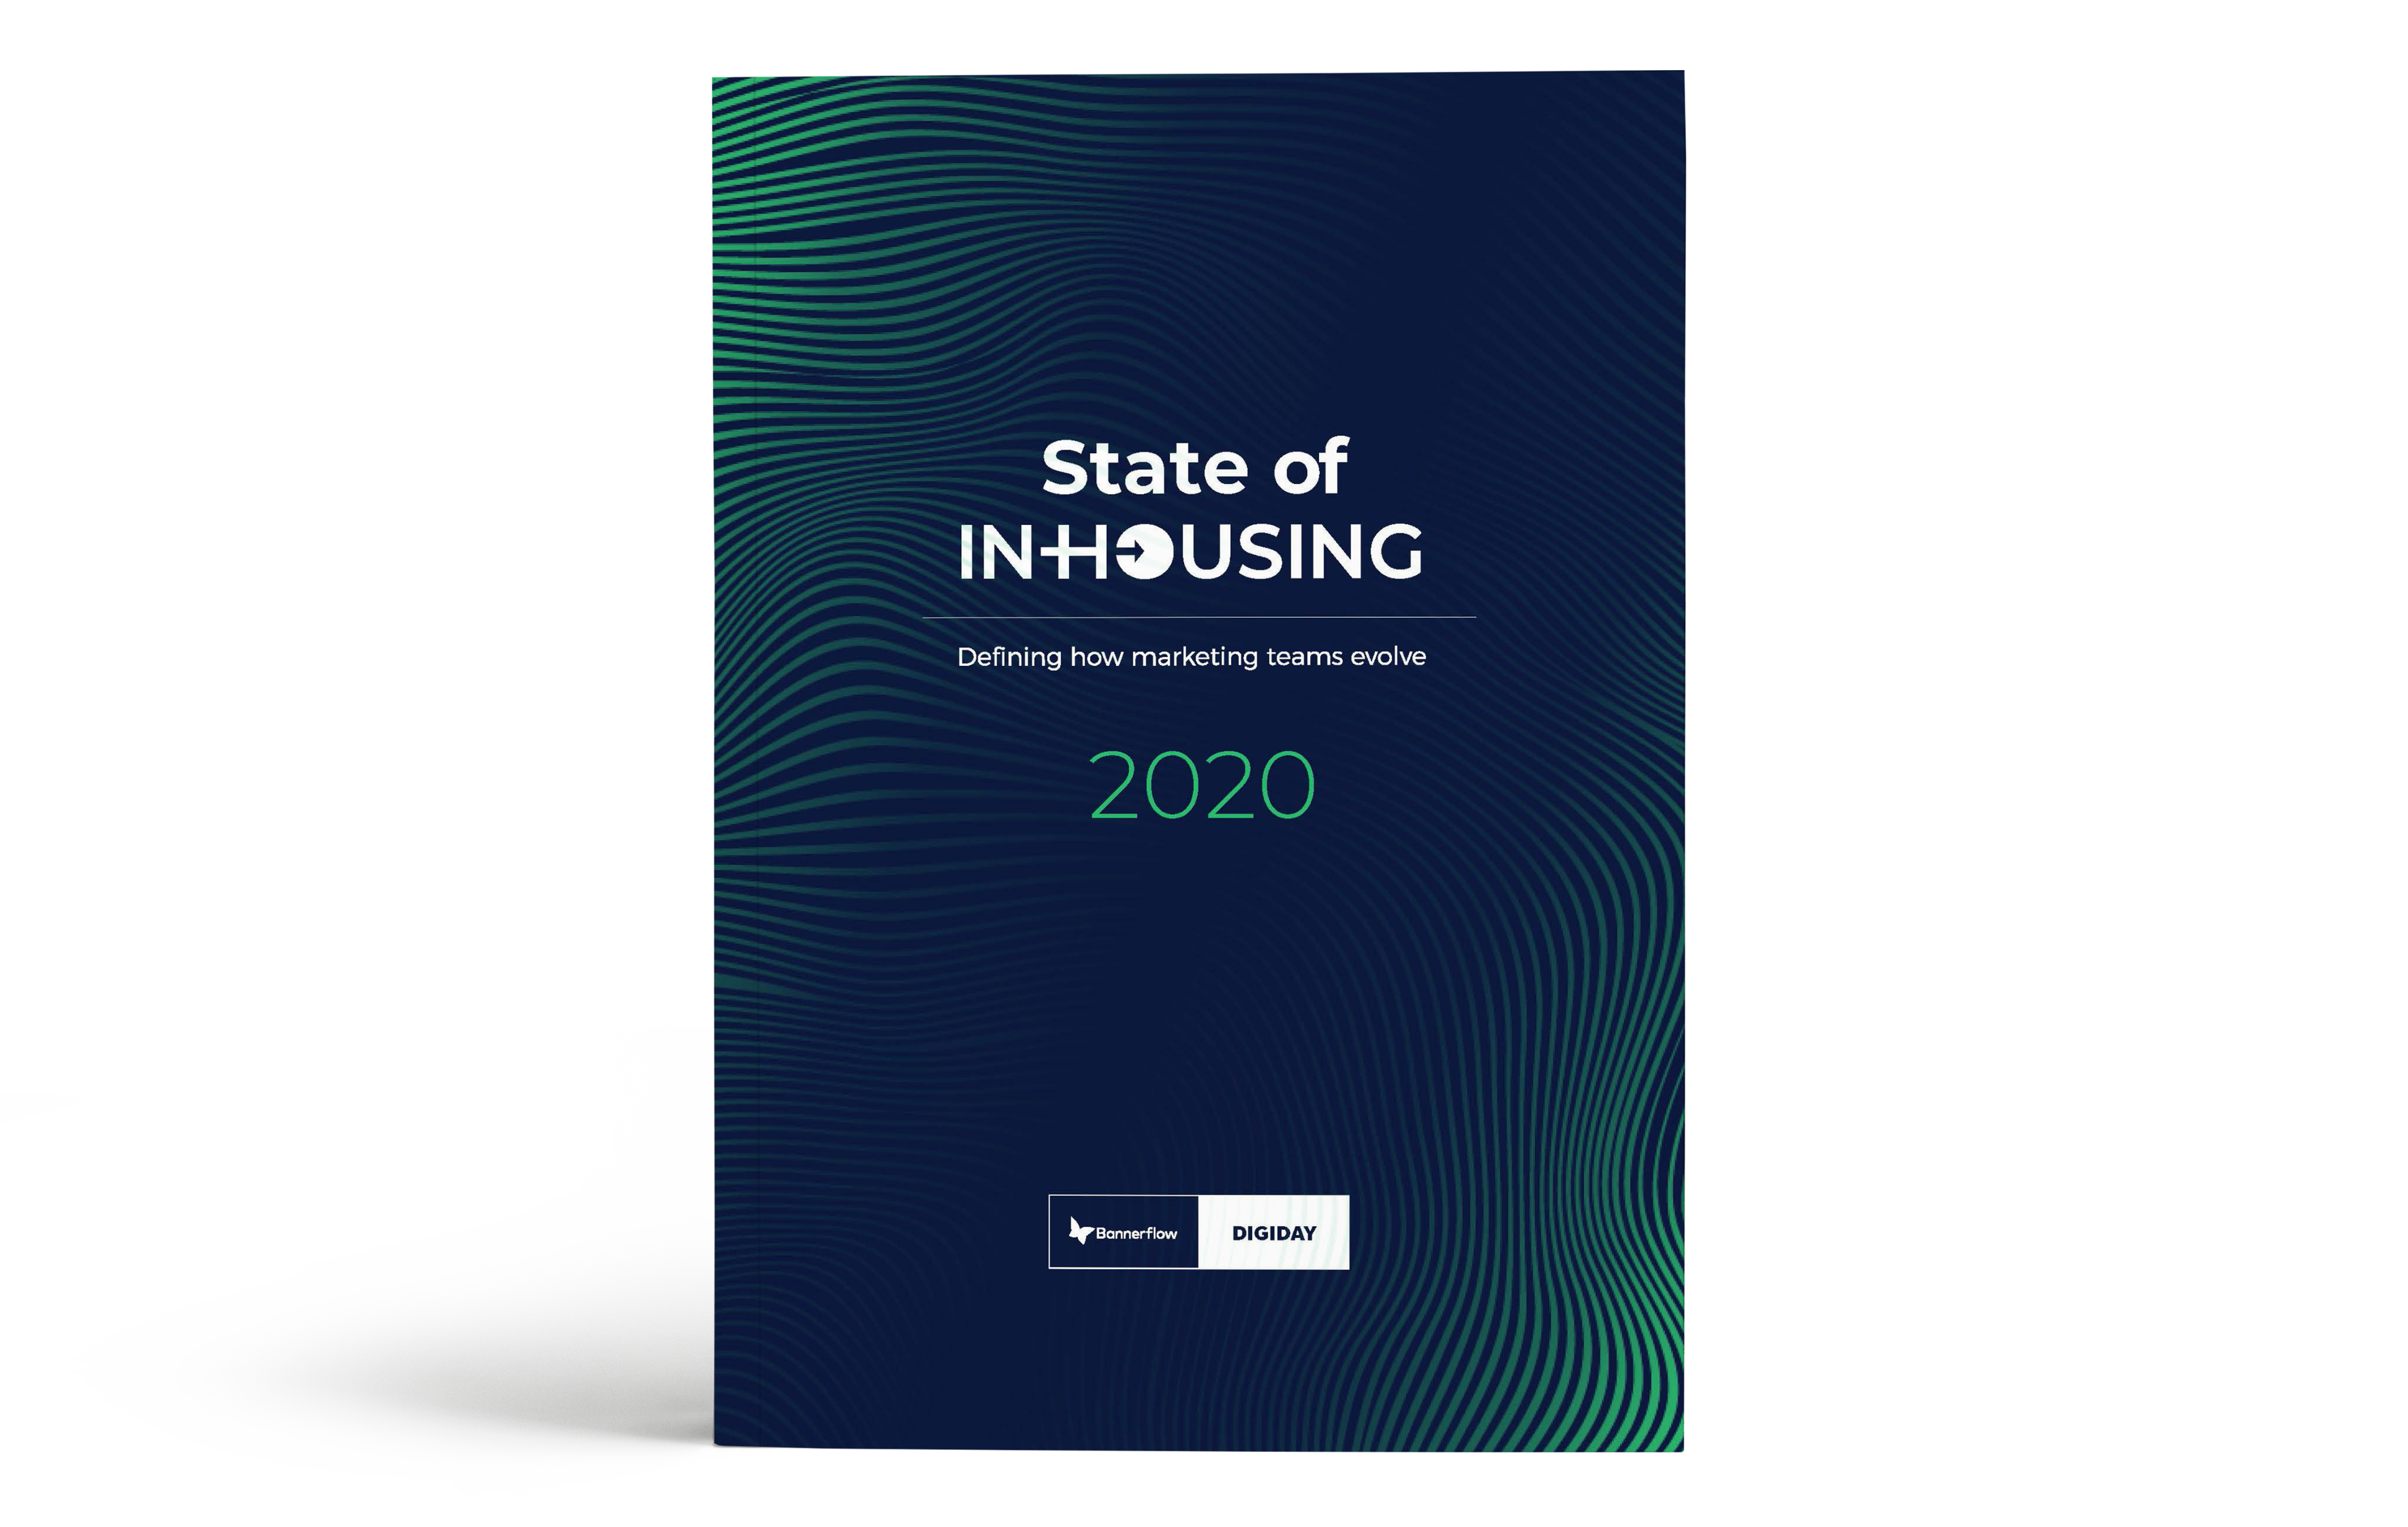 Archive: Read the 2020 report